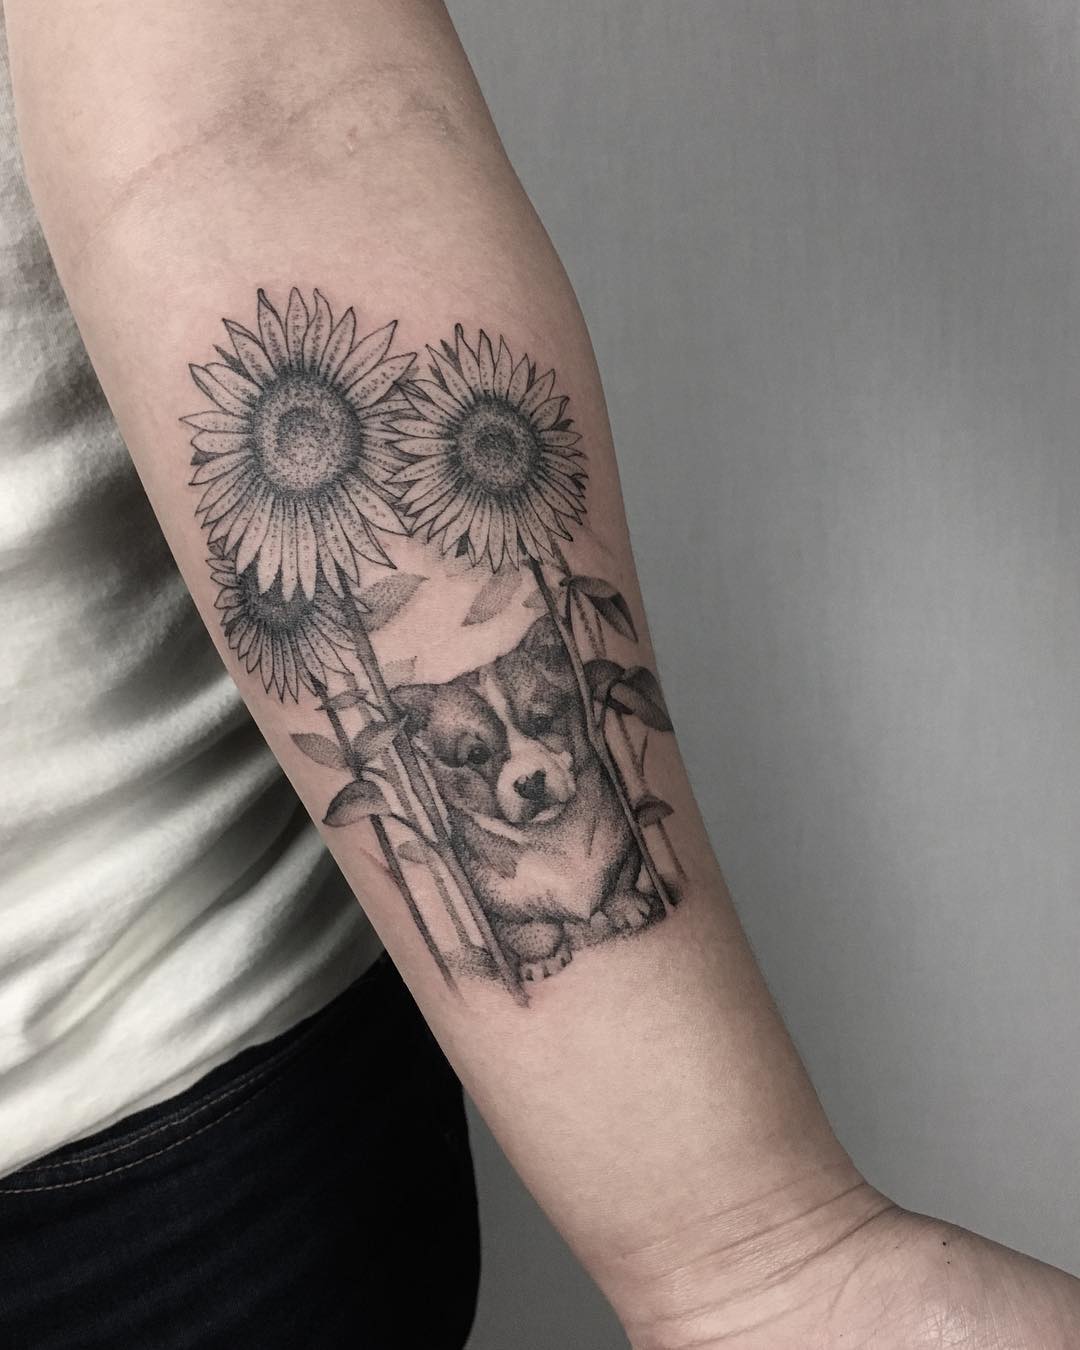 Single Needle Tattoo Of Sunflower With Puppy